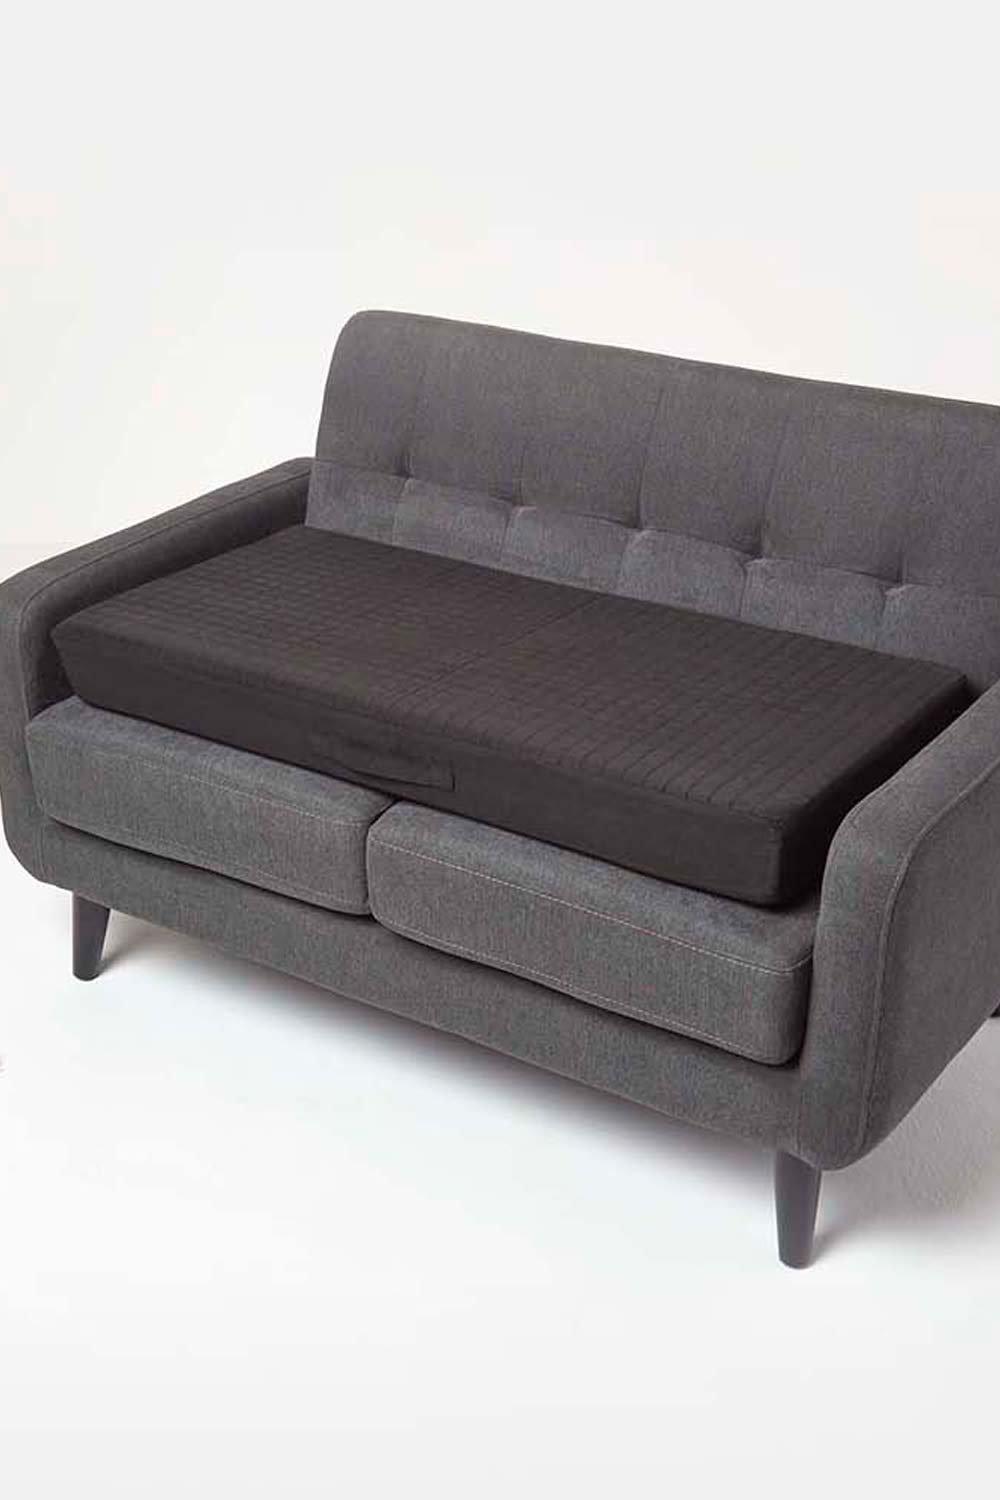 Suede Orthopaedic Foam 2 Seater Booster Cushion